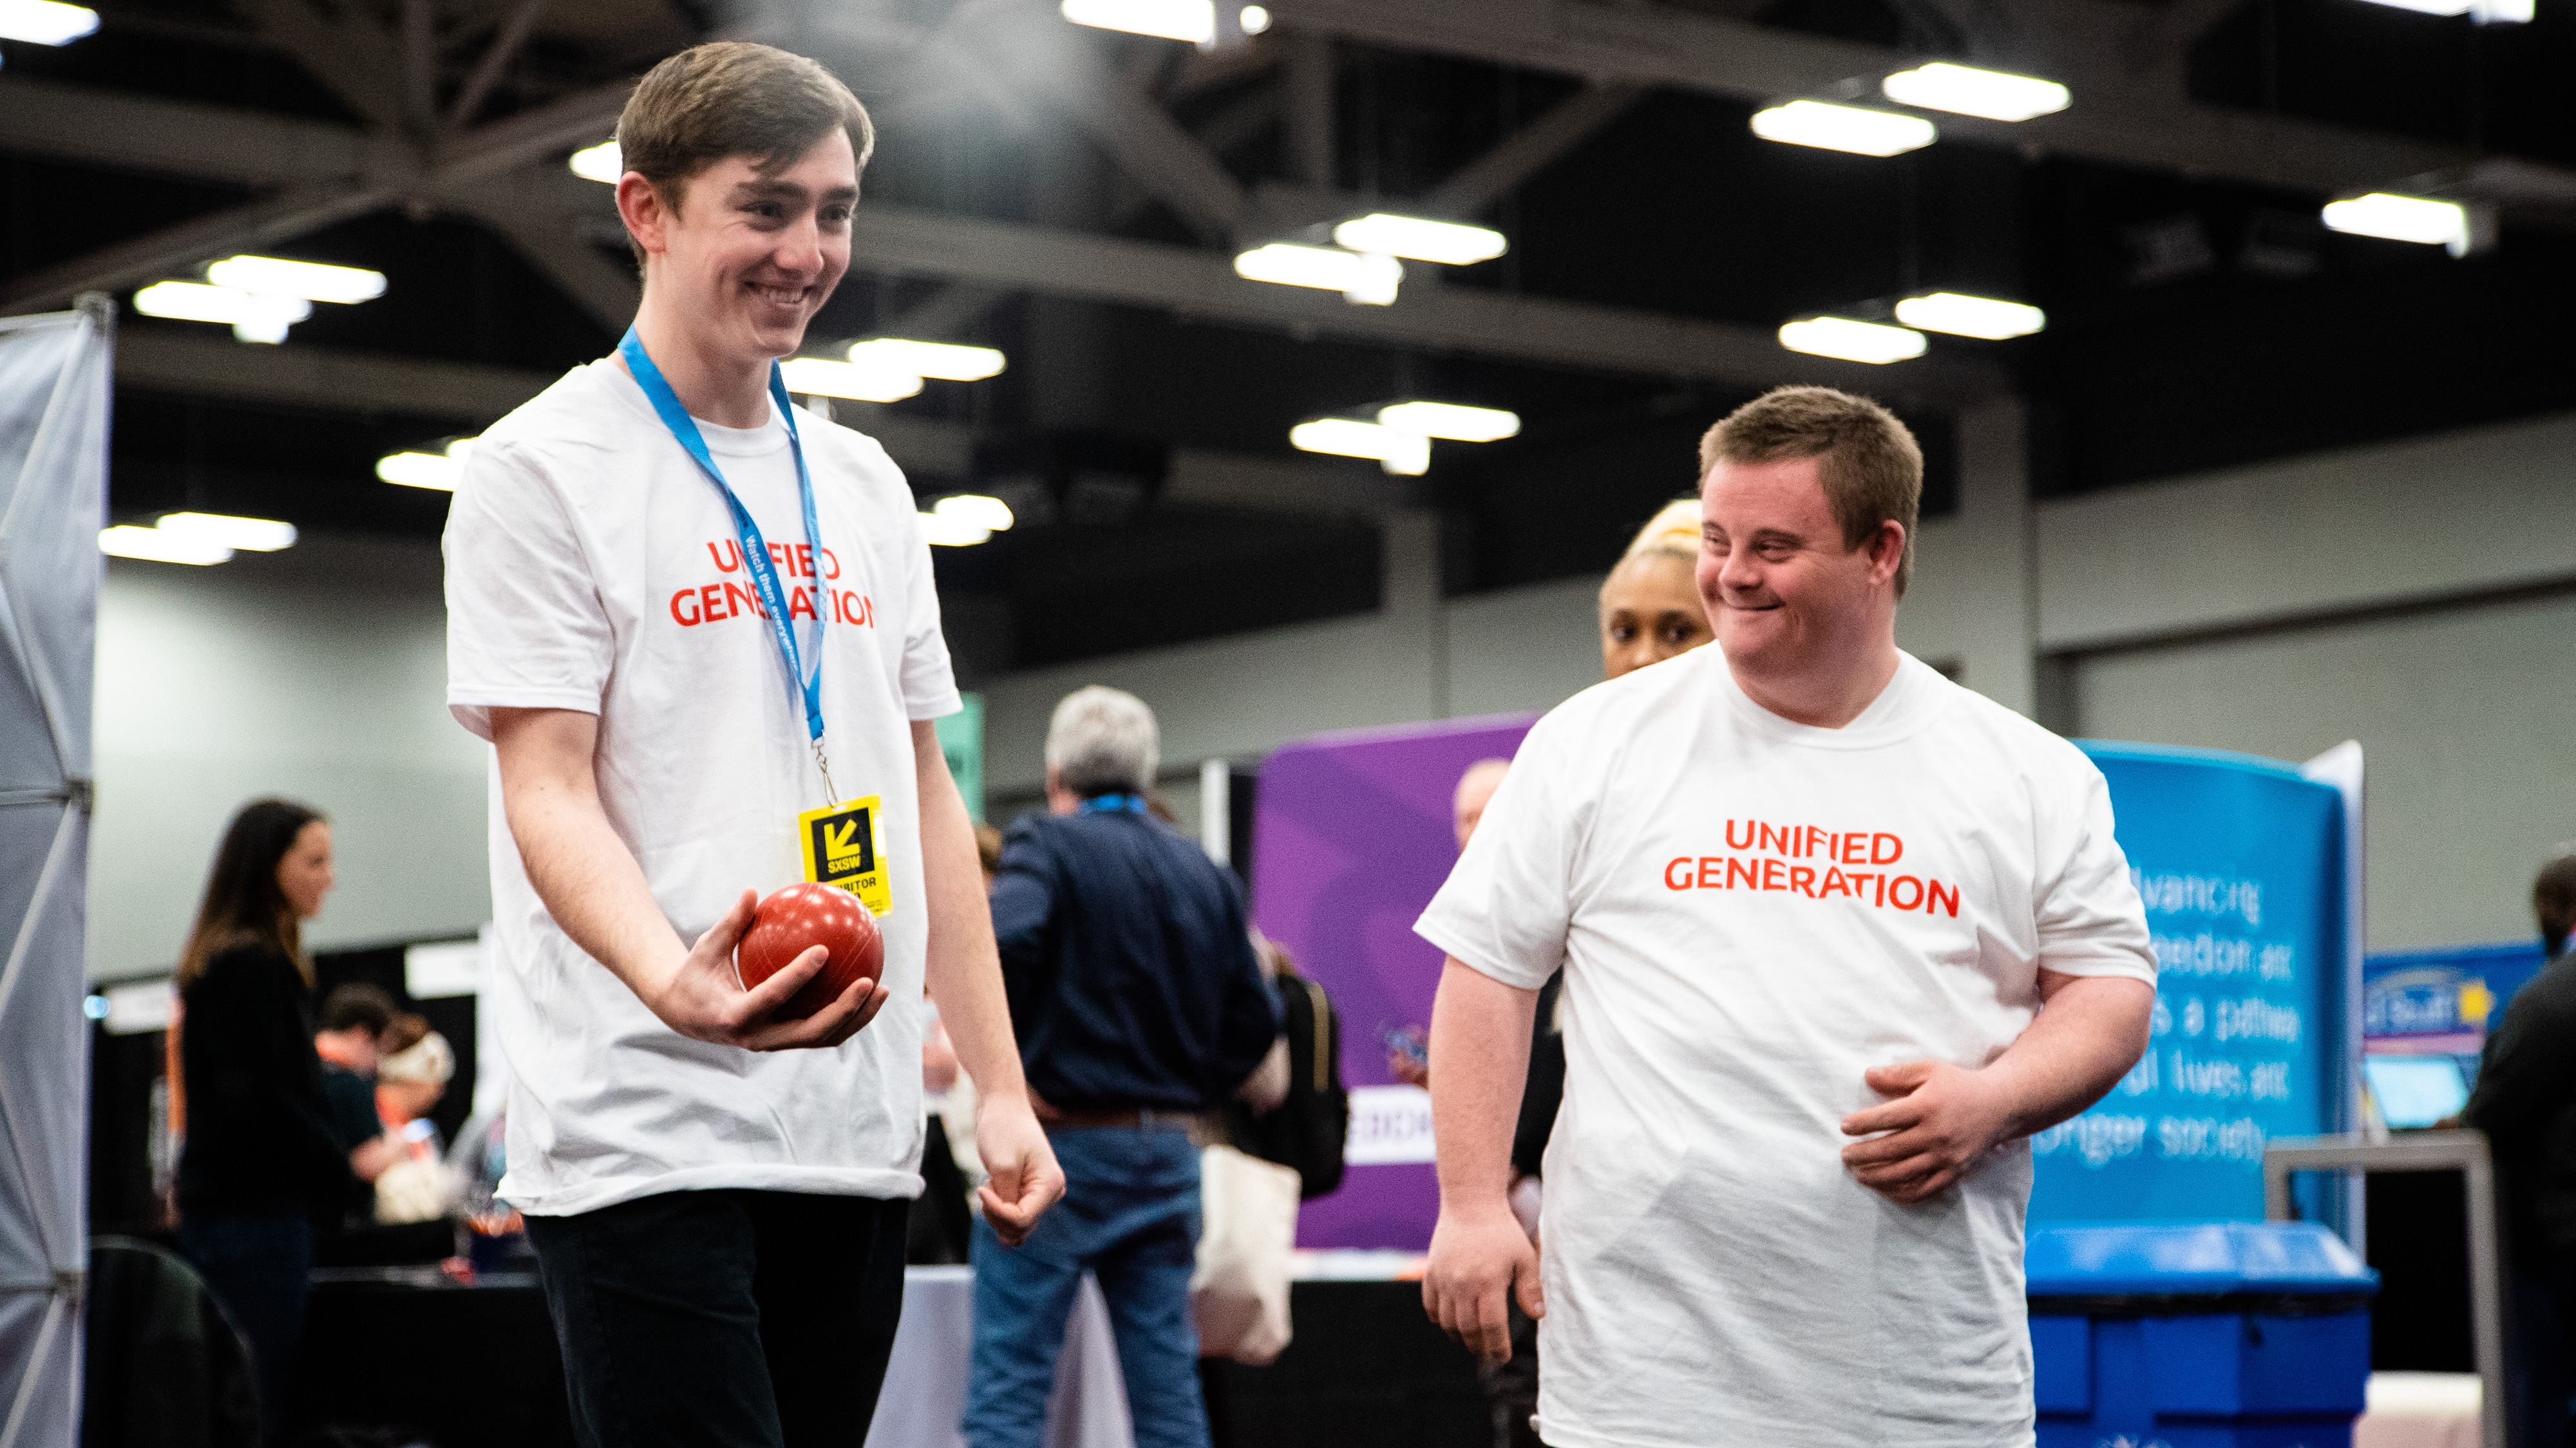 Special Olympics Bocce Ball Activation at the SXSW EDU 2019 Expo. Photo by Kit McNeil.